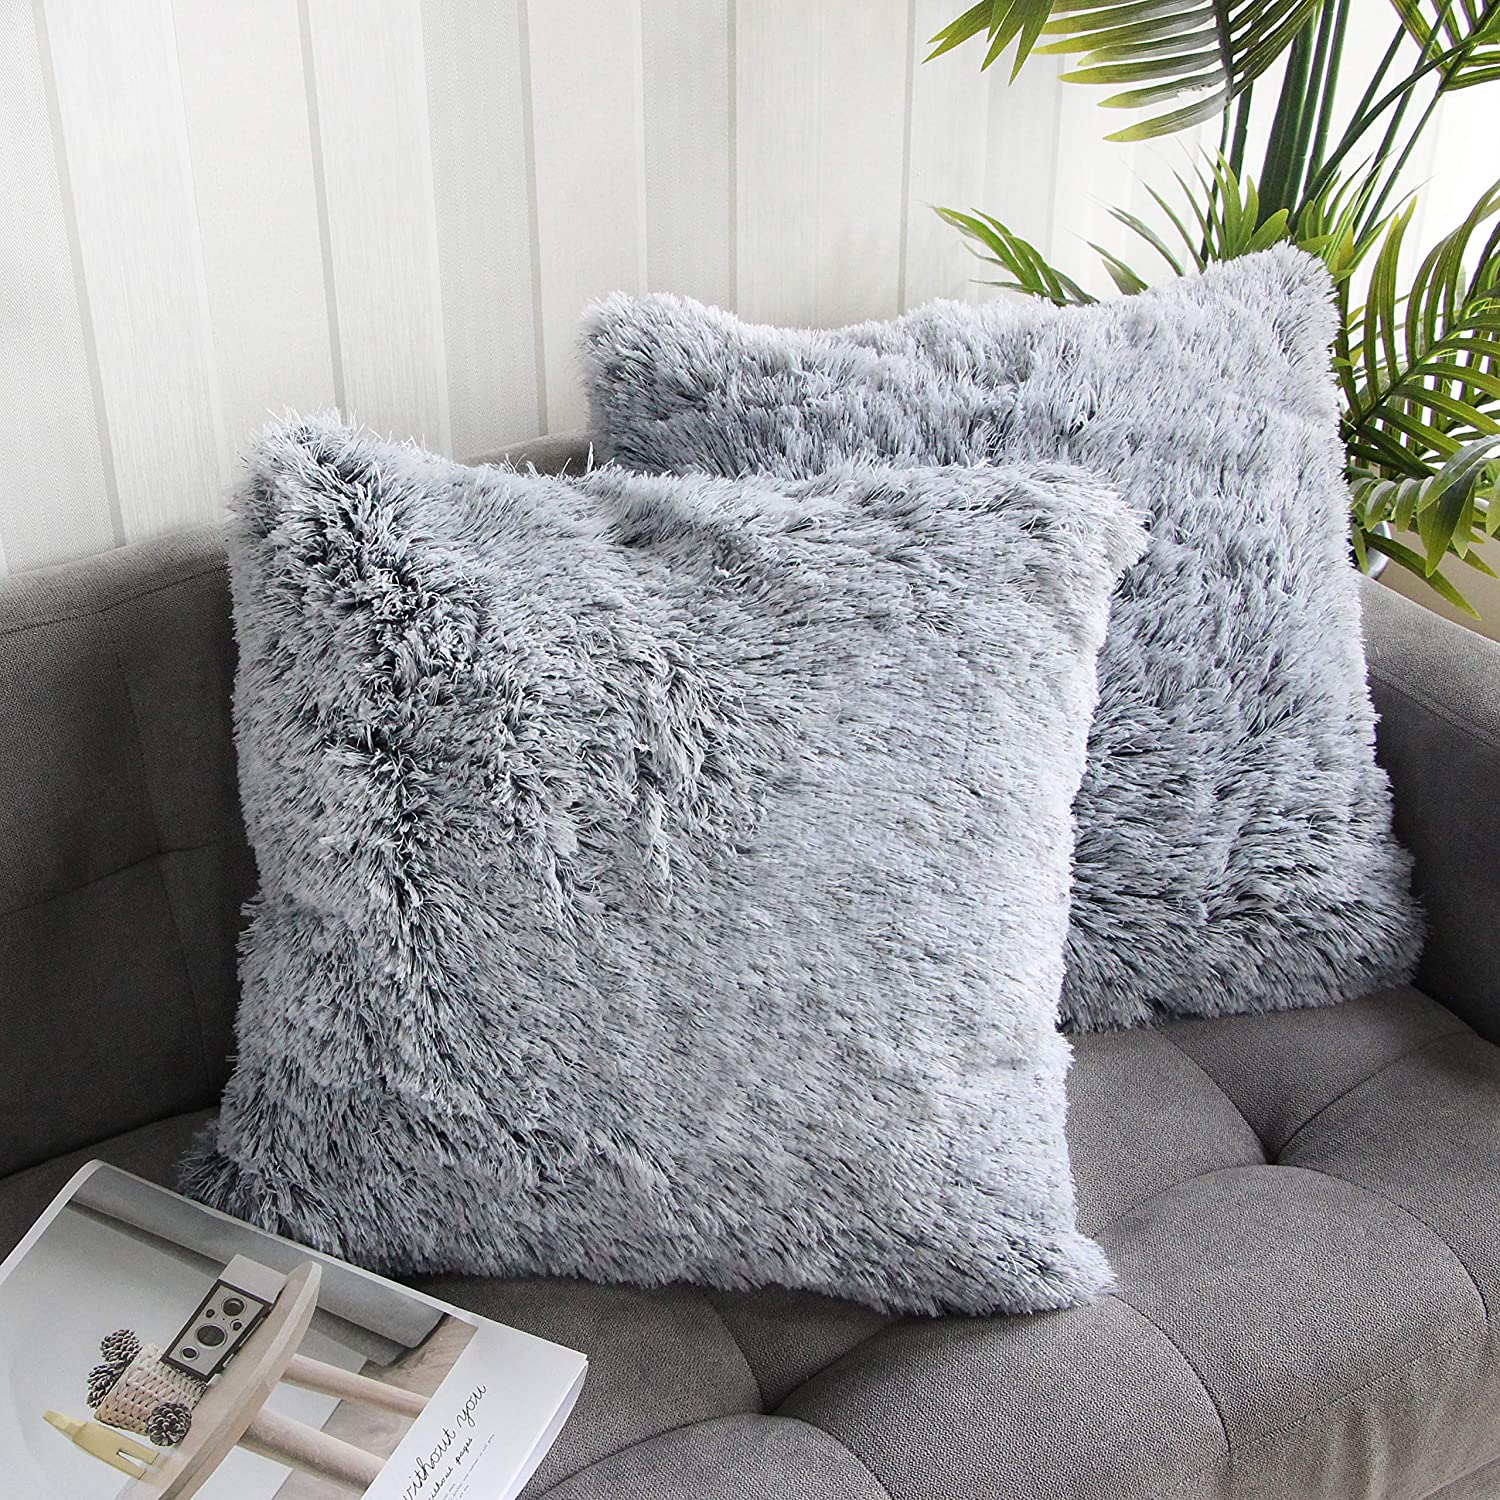 SR-HOME Soft Plush Throw Pillow Cover Luxury Velvet Decorative Cushion Sham  For Couch, Living Room, Sofa, Bed Faux Fur Square Accent Textured Throw  Pillow Cas - ShopStyle